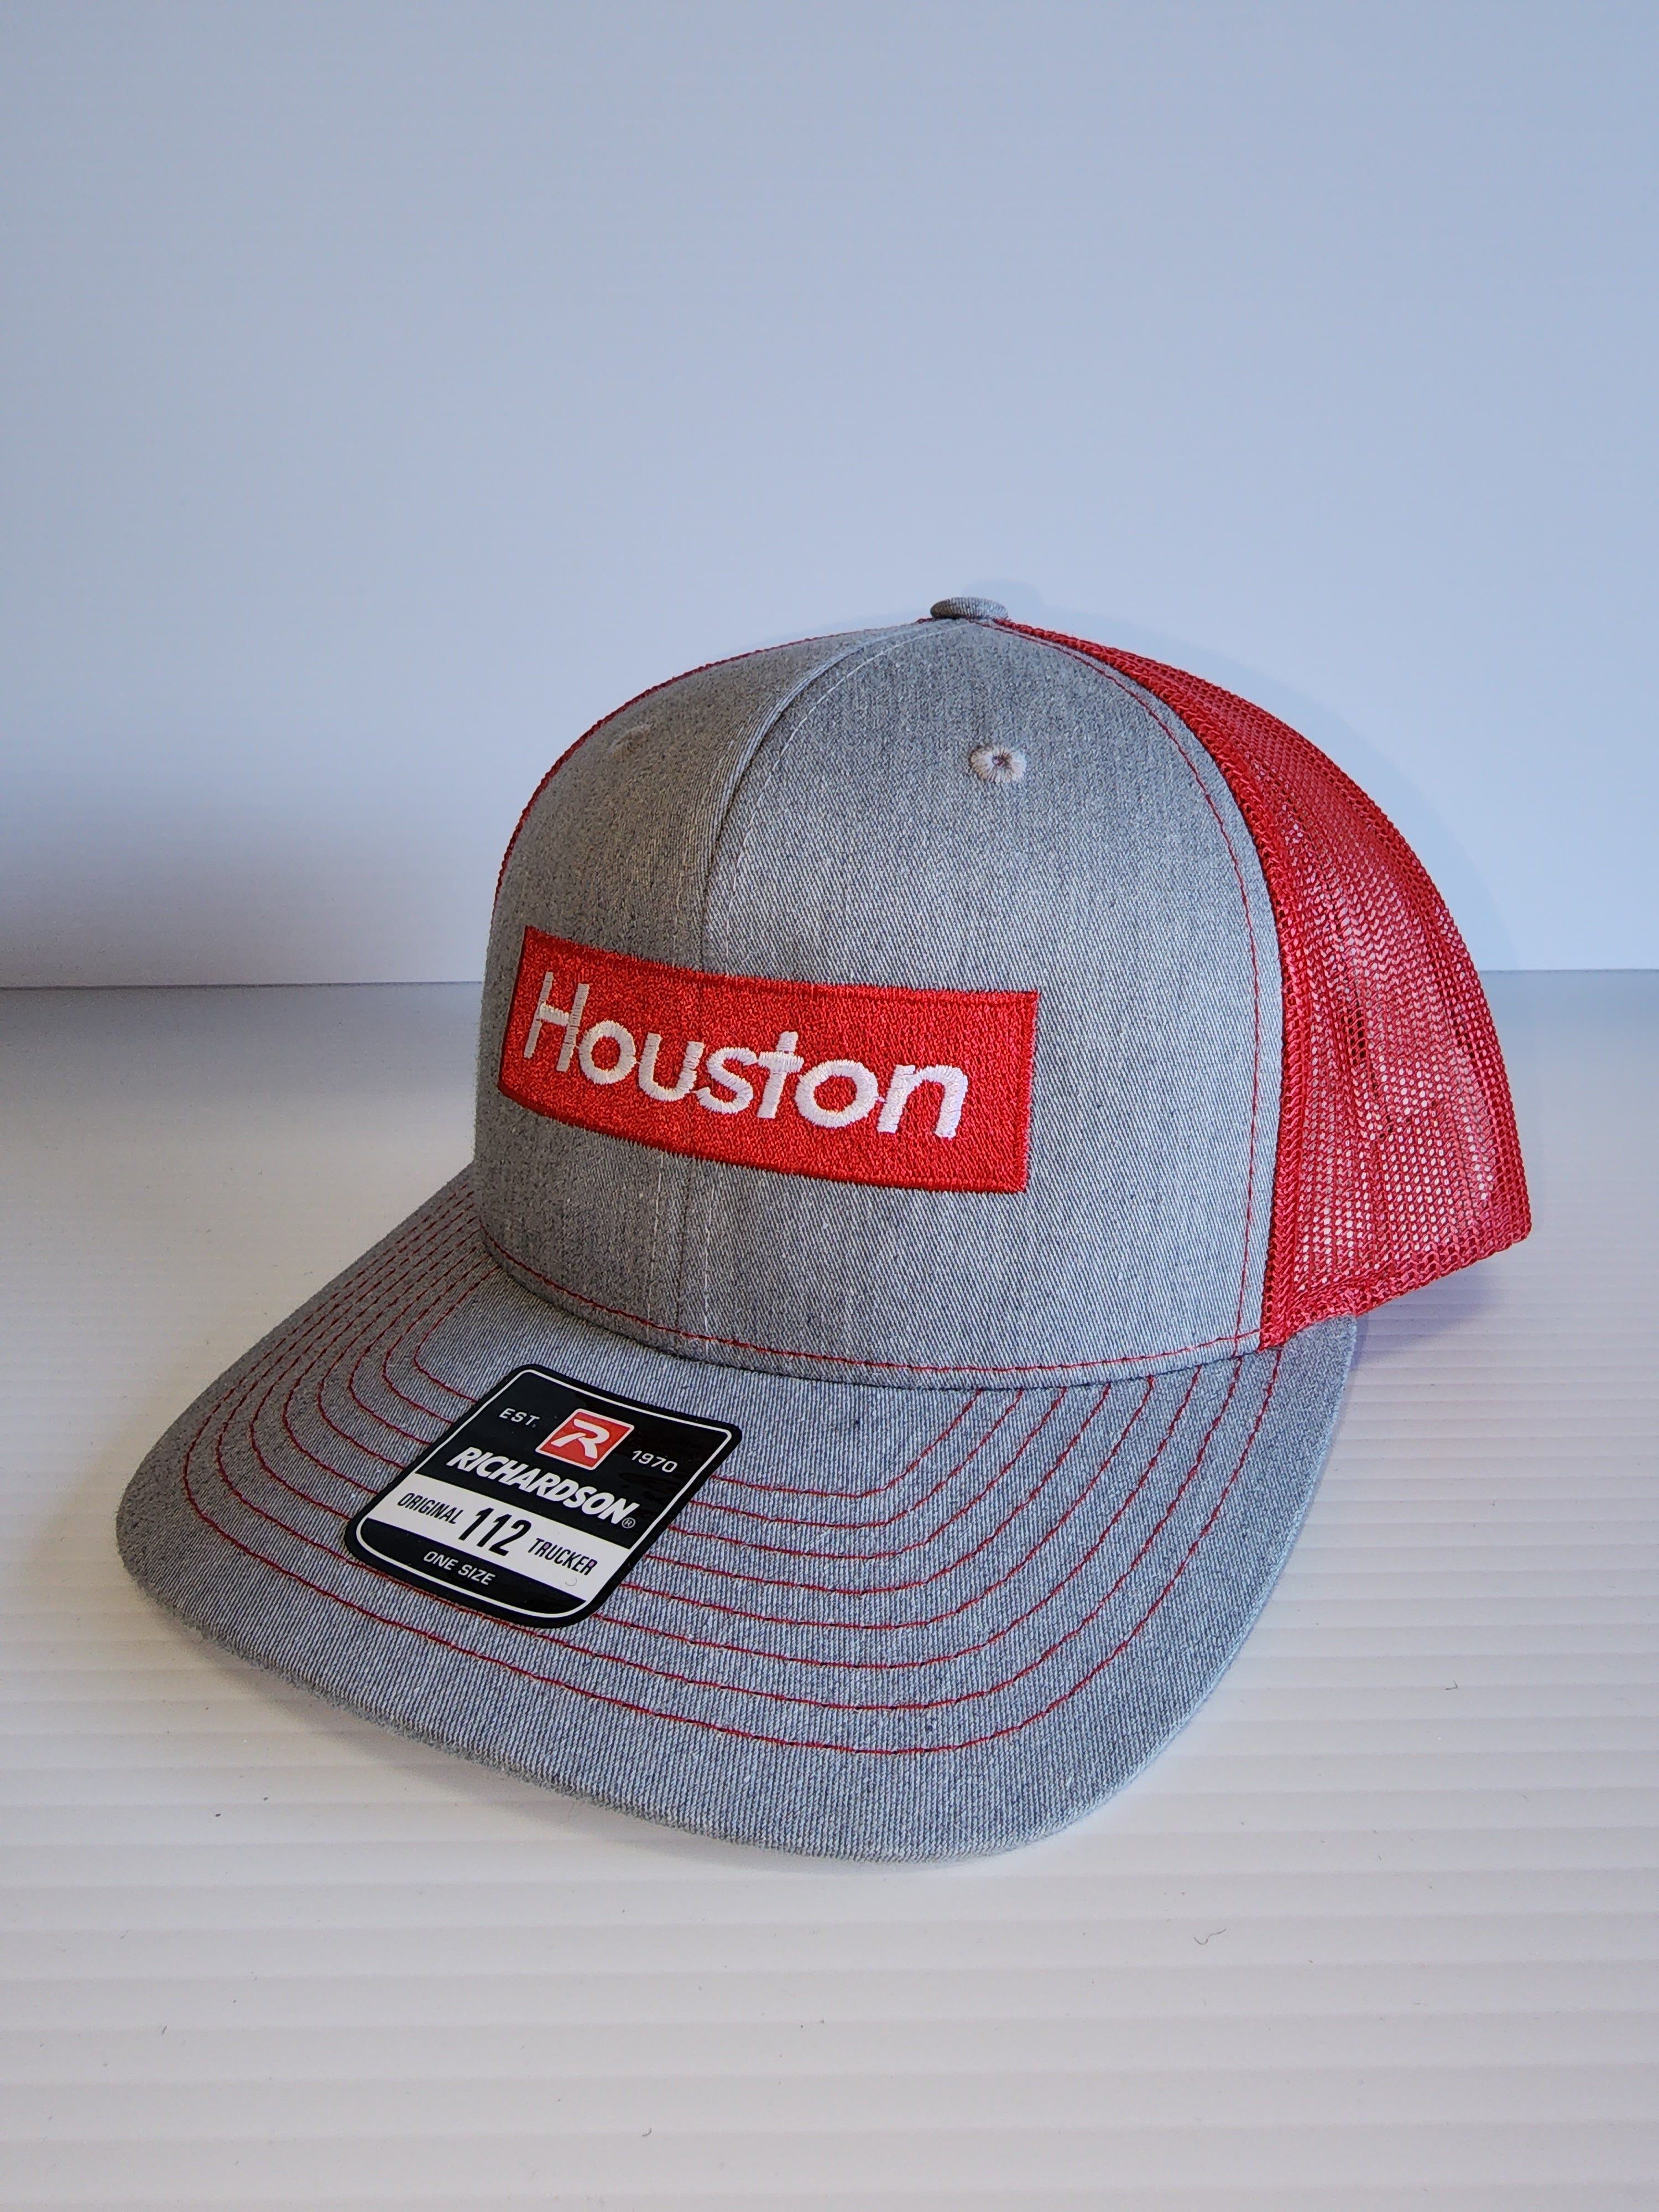 Houston Supreme on a Grey/Red Trucker Cap